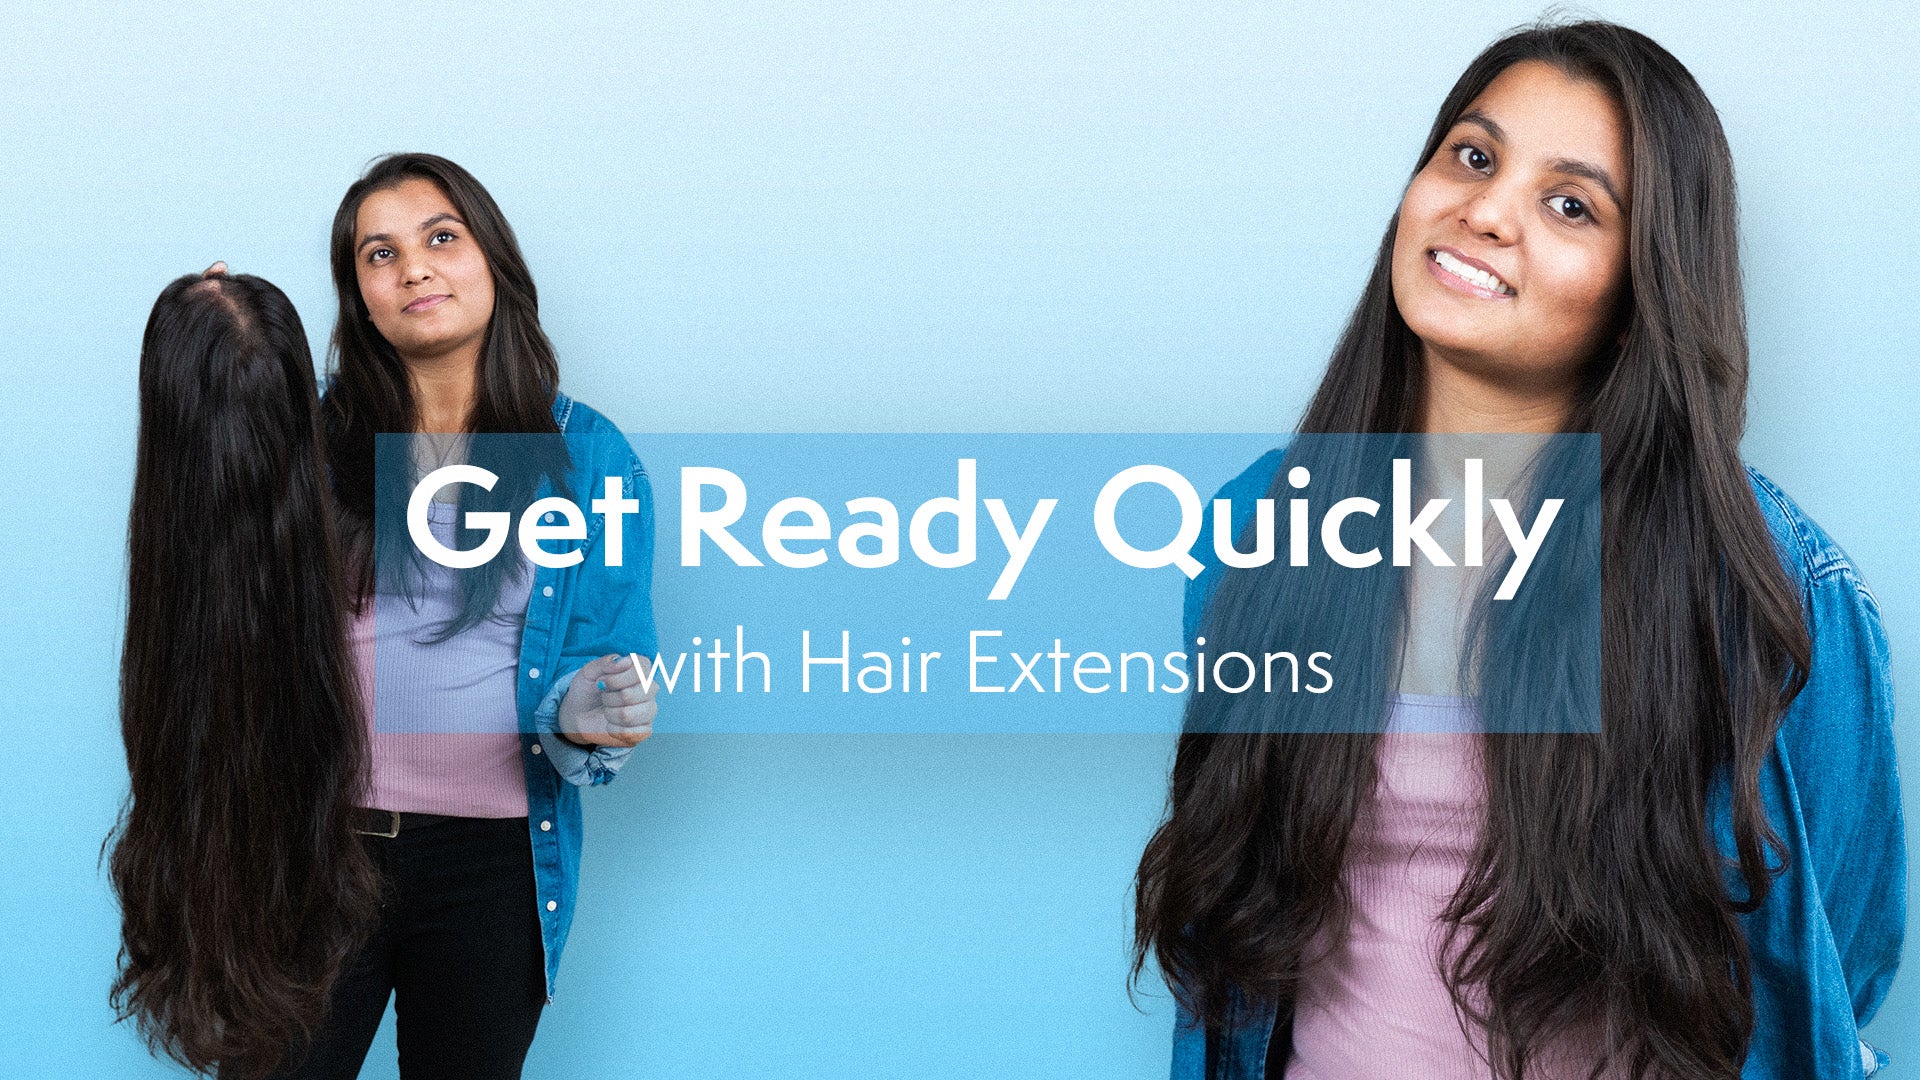 How hair extensions can help you get ready quickly?